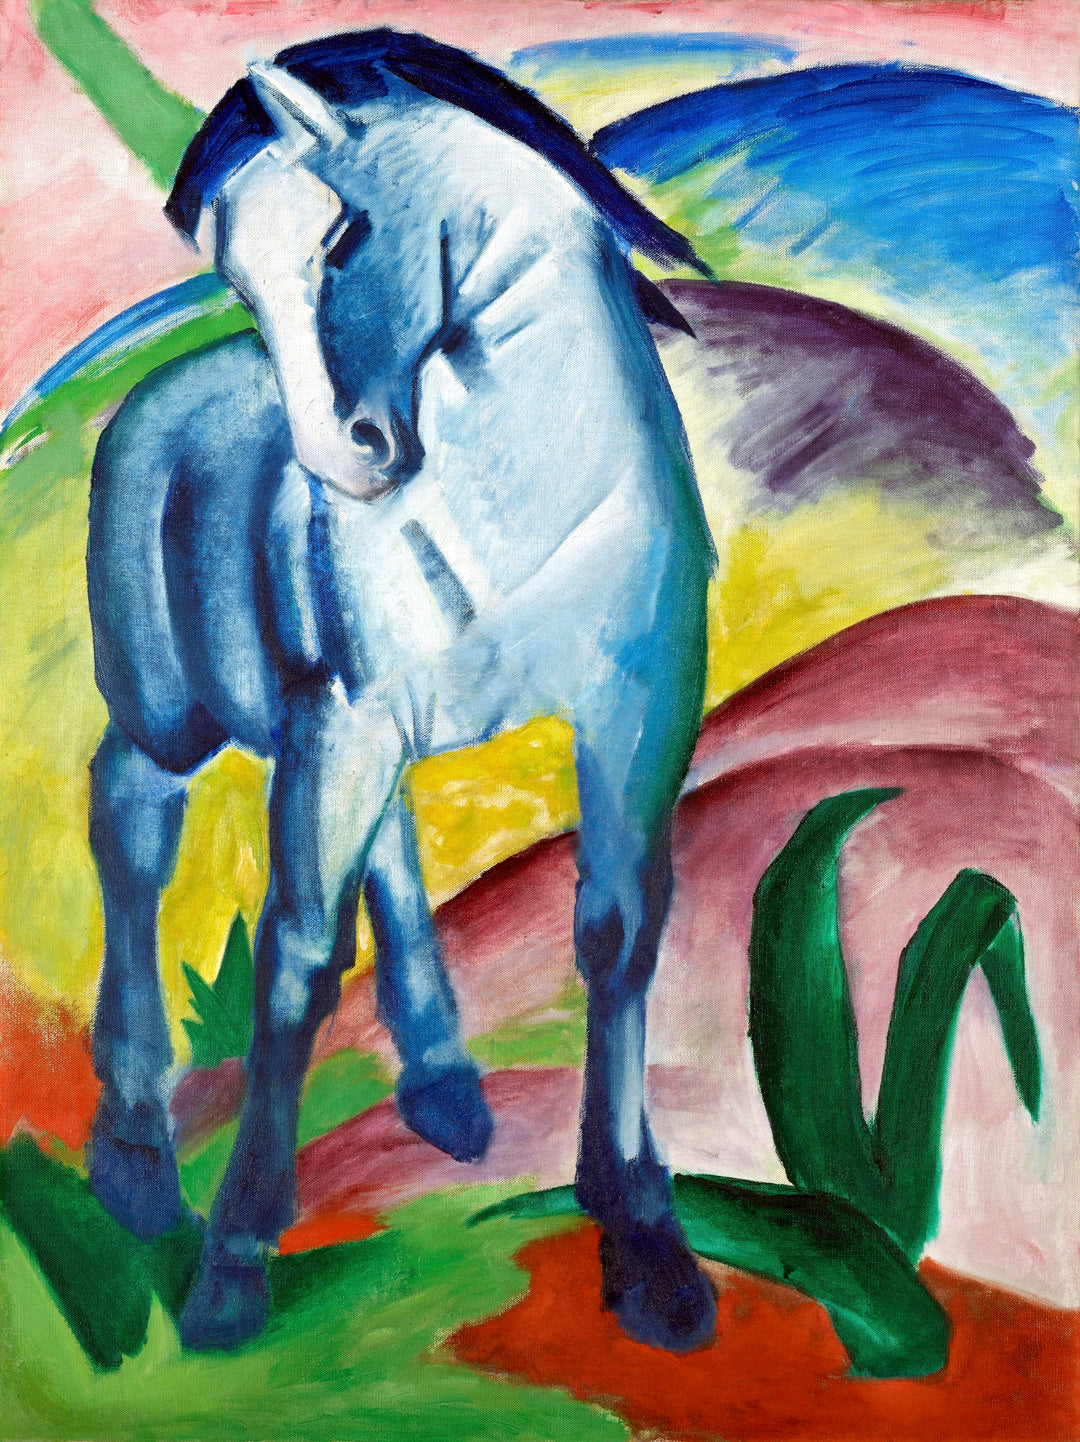 Blue Horse I, 1911 Franz Marc Reproduction 100% Hand Painted Oil on Canvas Painting. Blue Surf Art